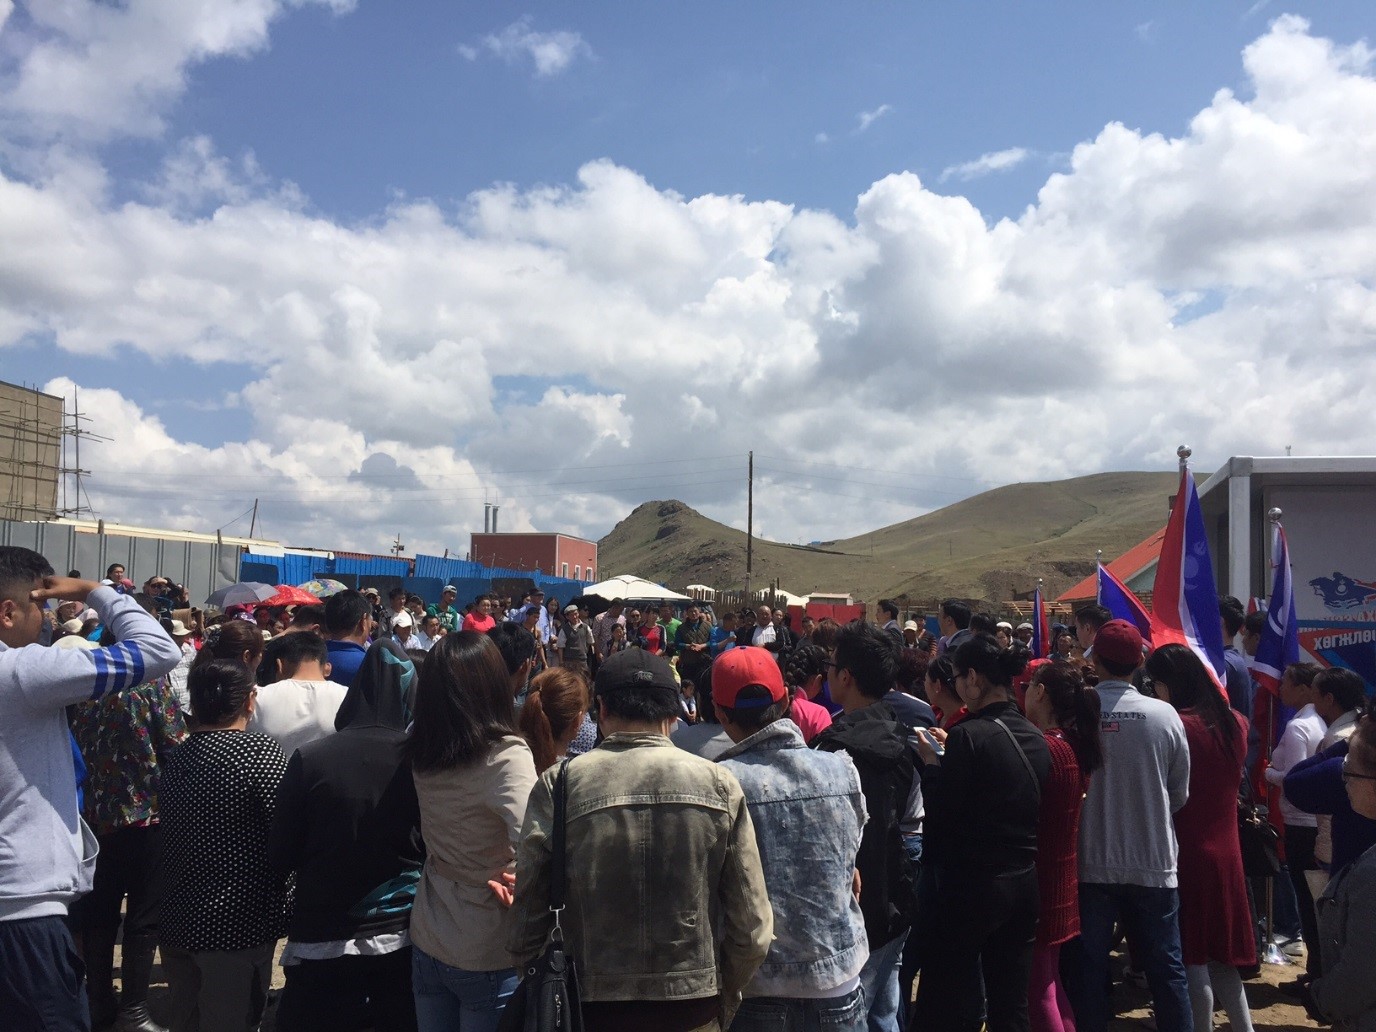 A campaign rally during June 2016 parliamentary elections in Mongolia